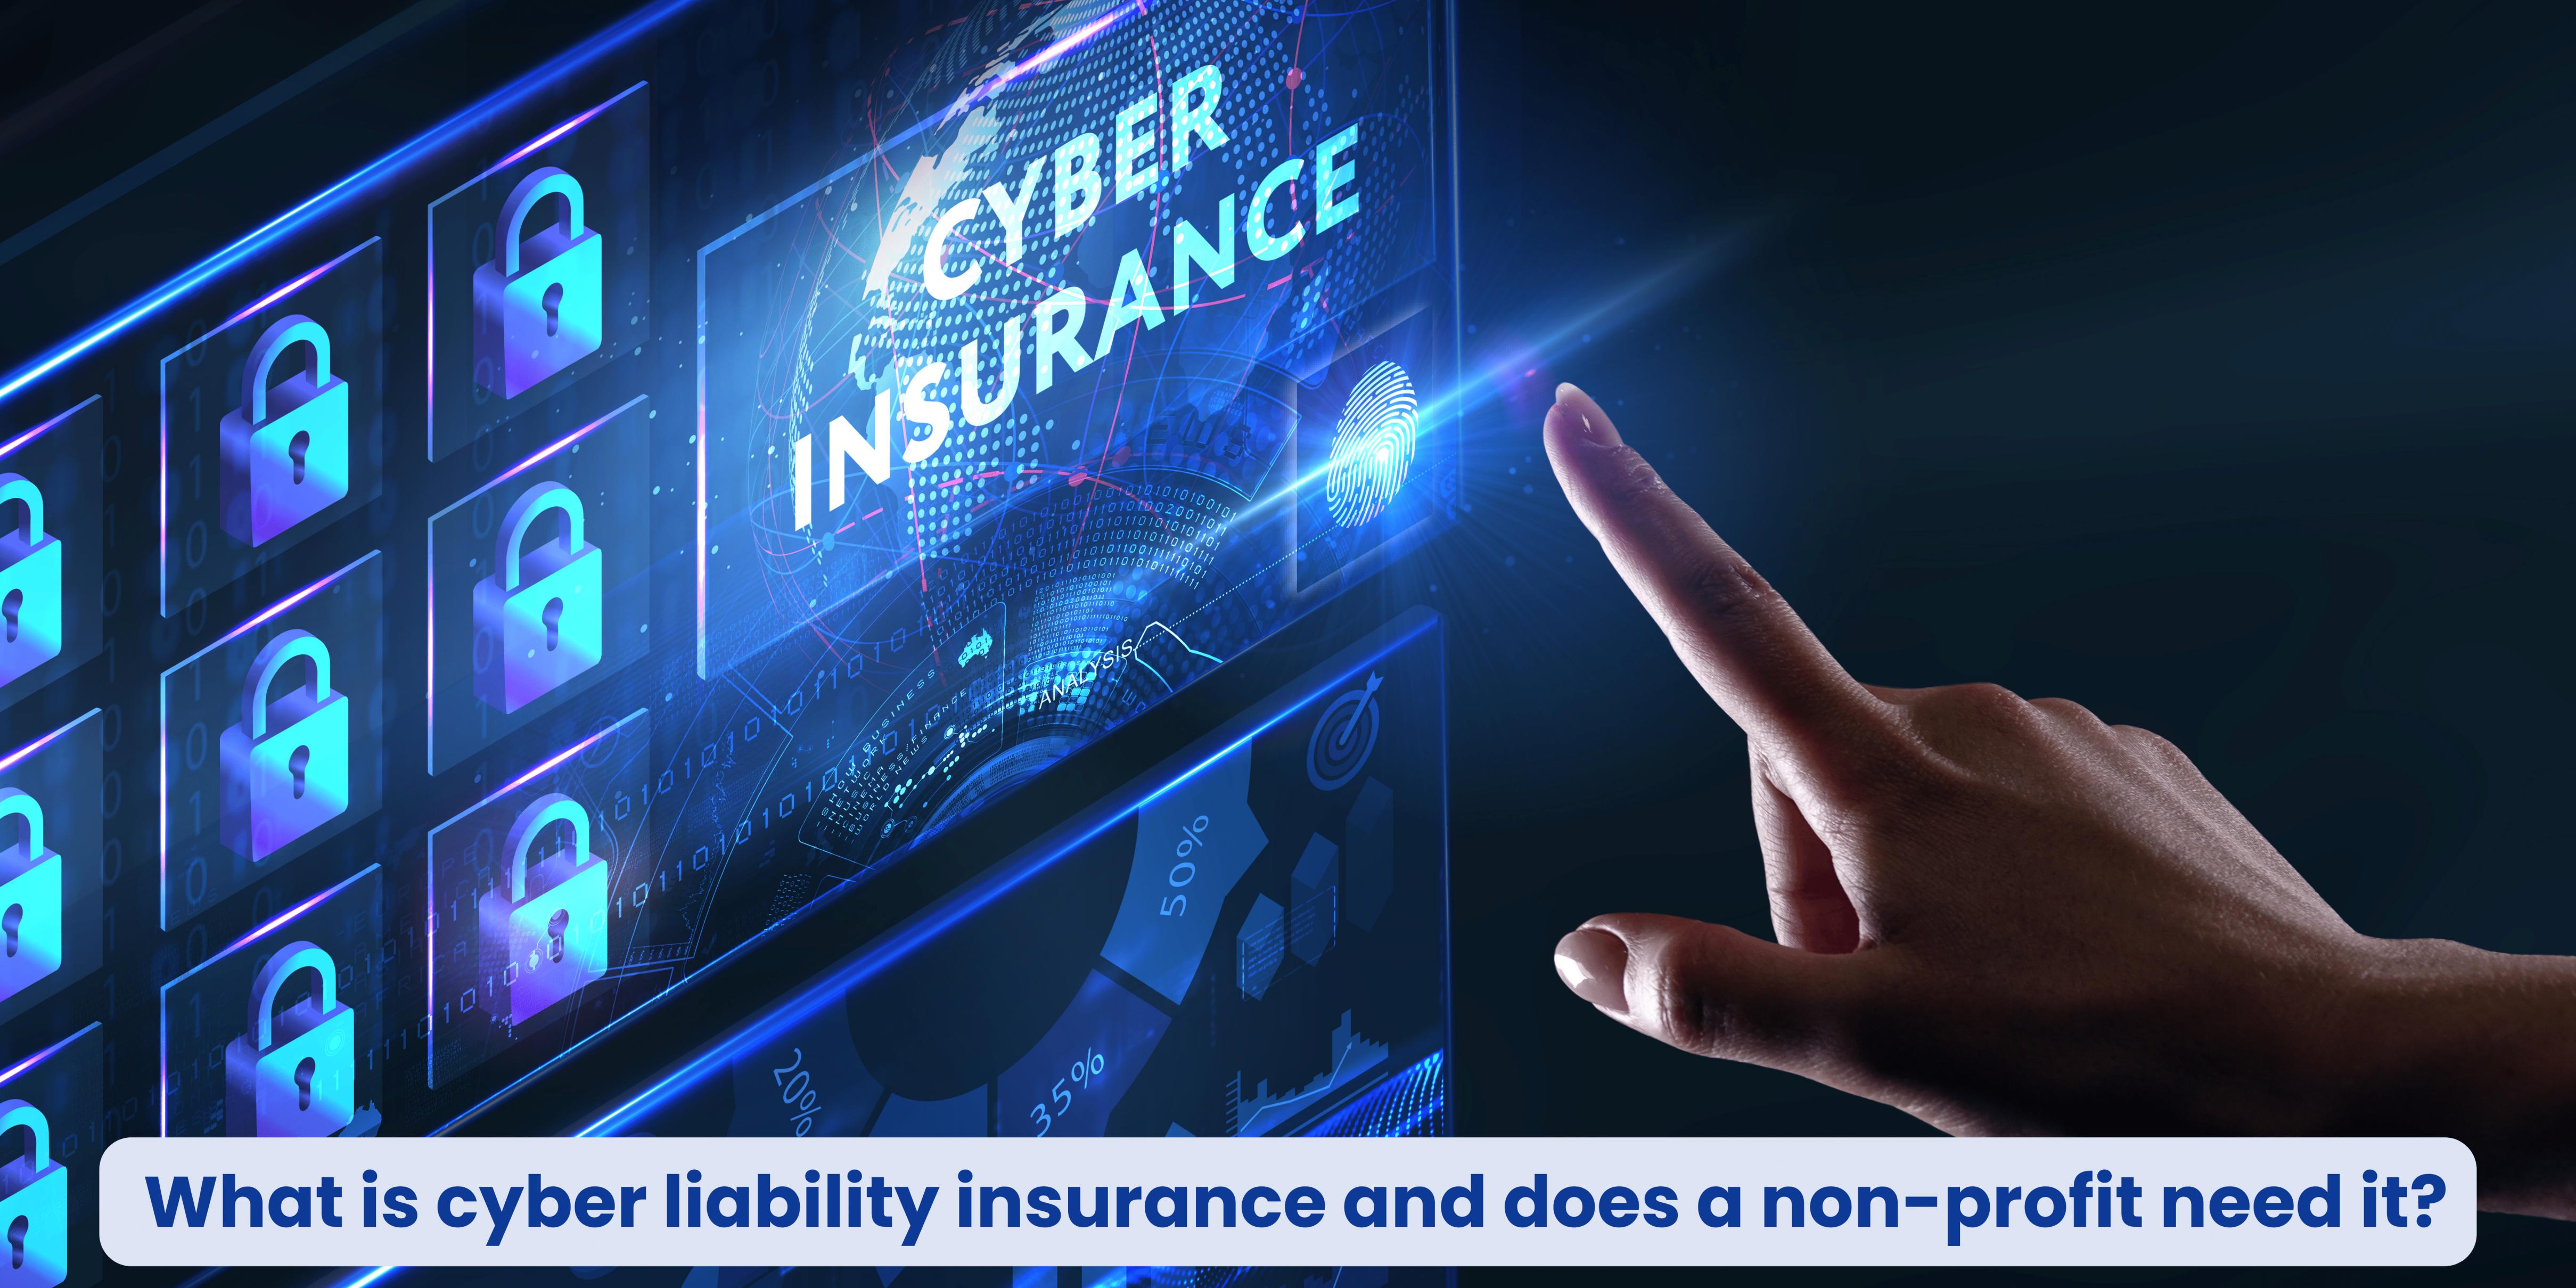 What Is Cyber Liability Insurance and Does a Non-Profit Need It?